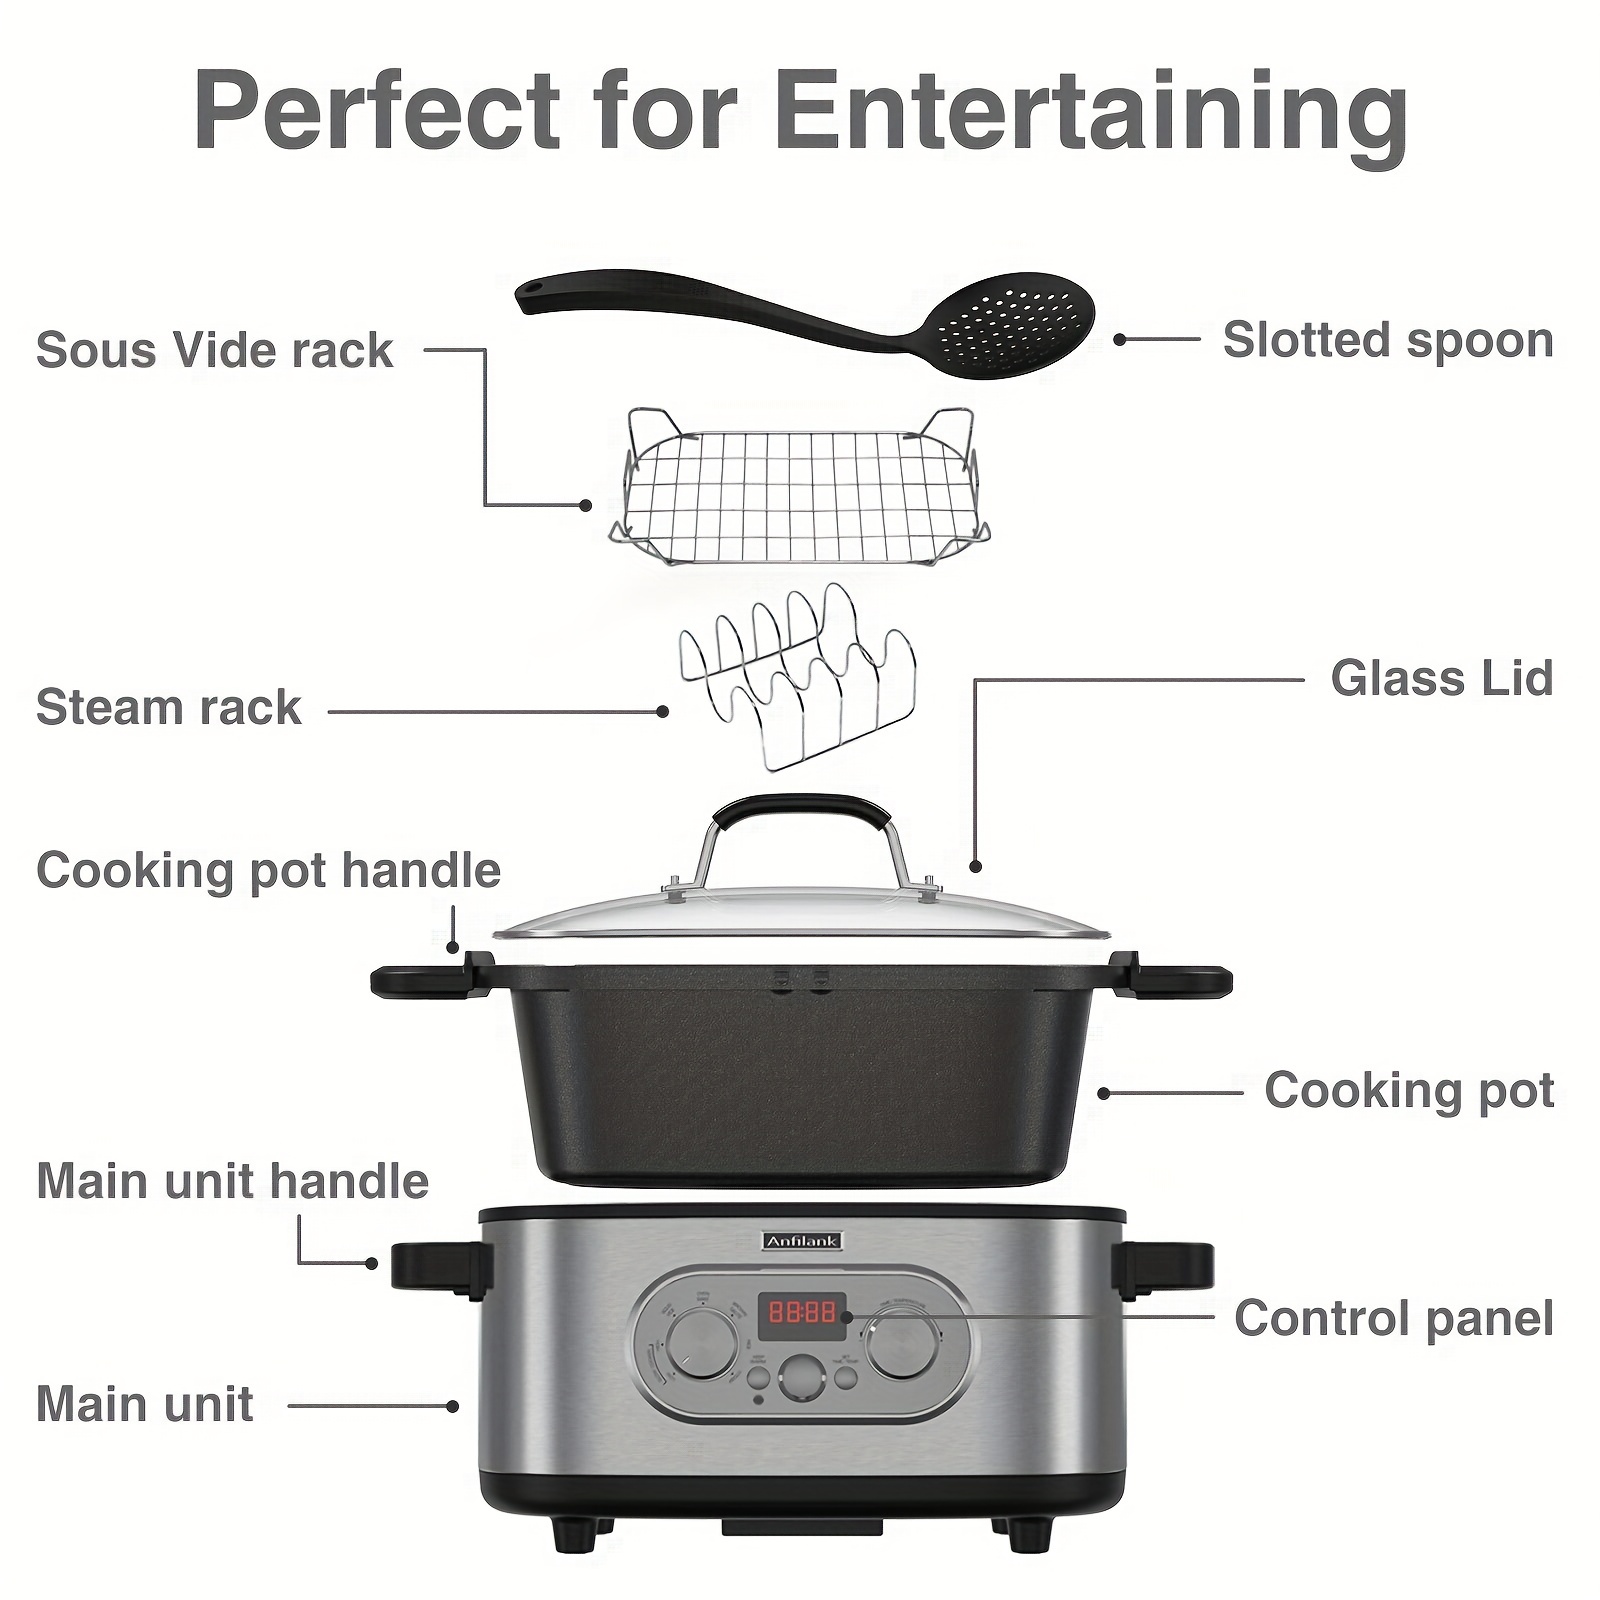 What Is the Instant Pot Gem - Slow Cooker